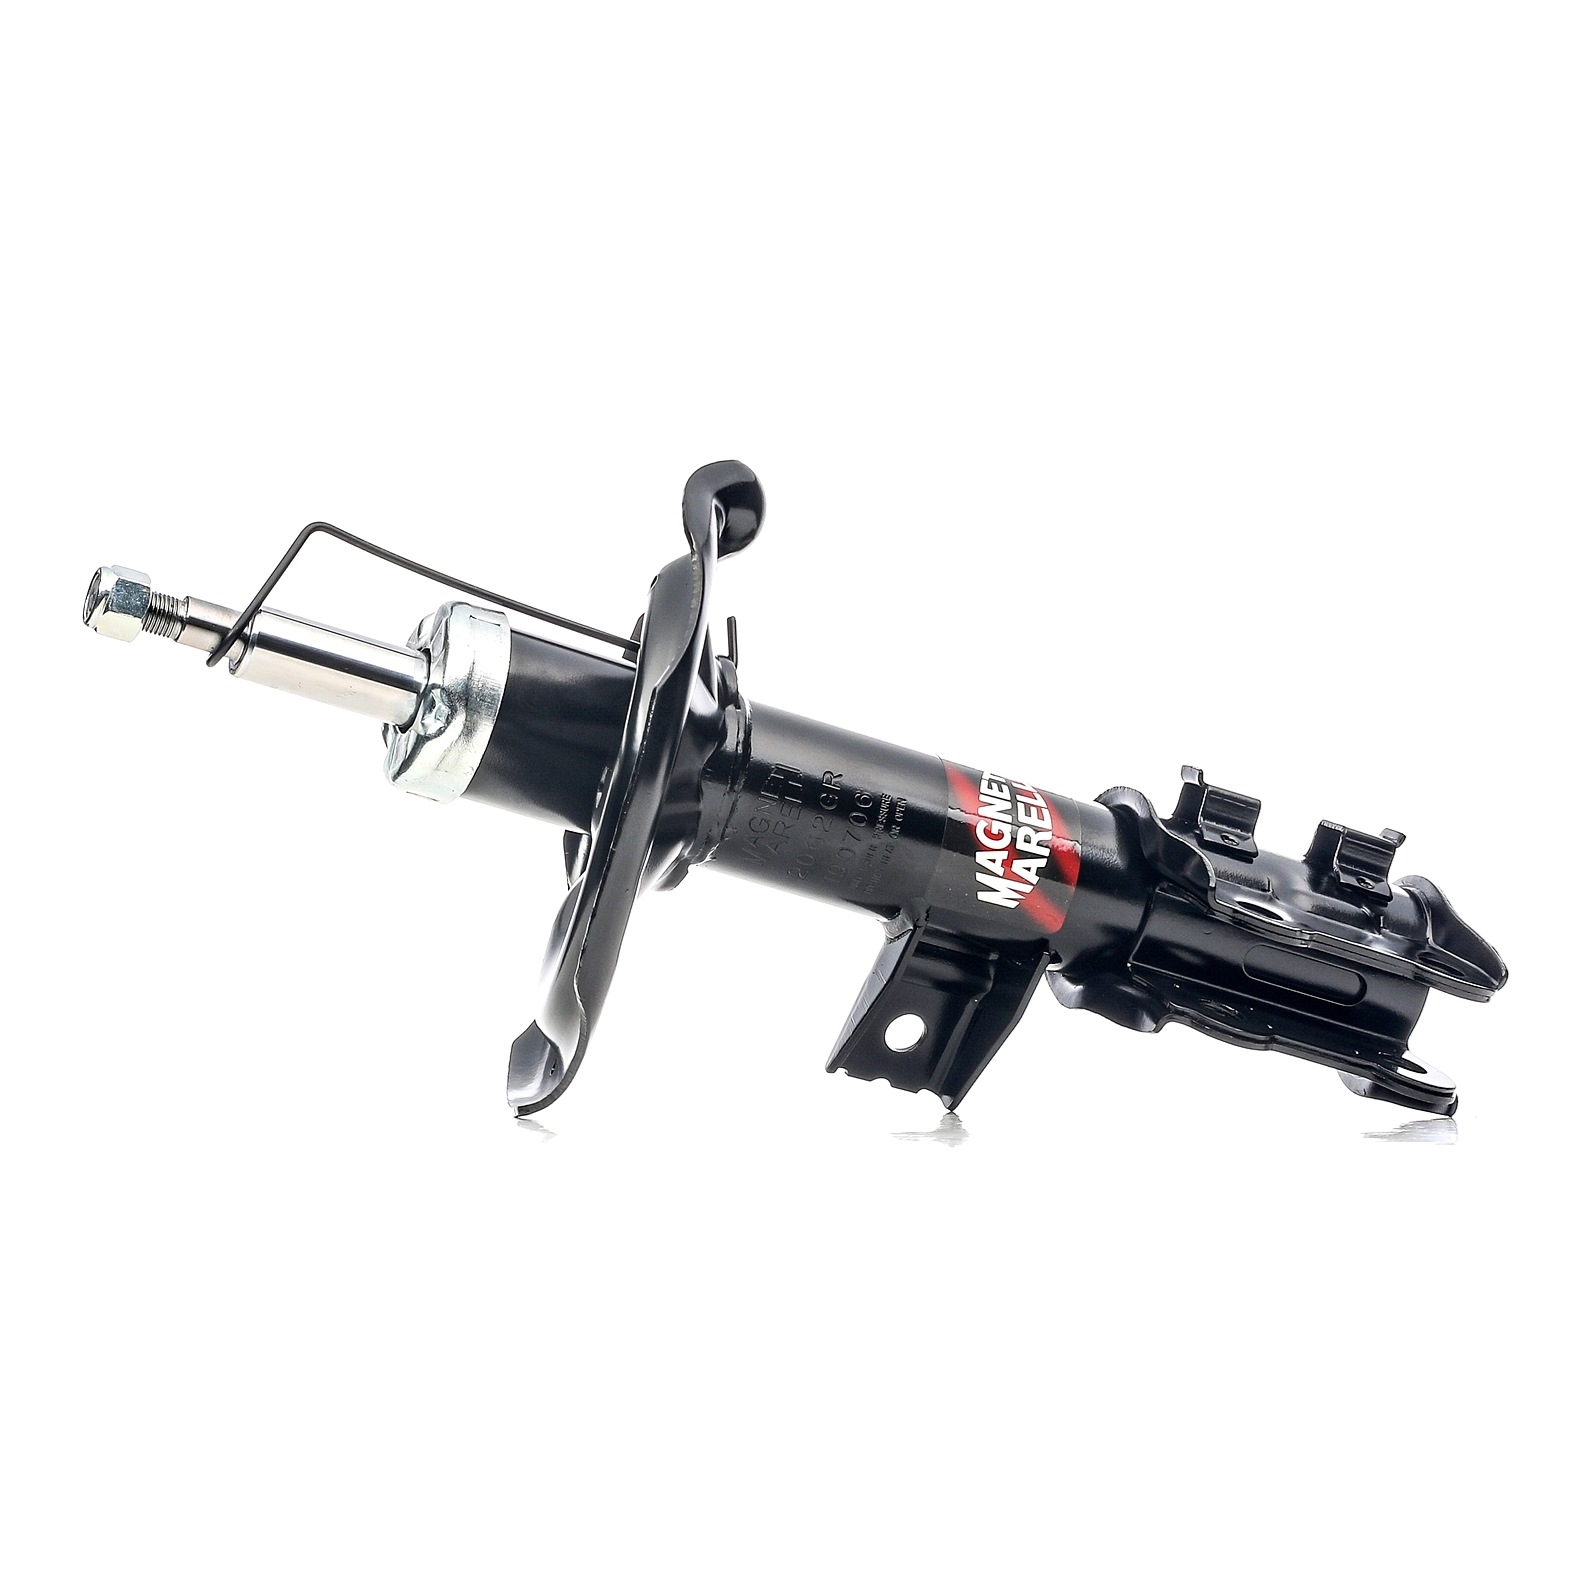 MAGNETI MARELLI 352062070100 Shock absorber Front Axle Right, Gas Pressure, Twin-Tube, Suspension Strut, Top pin